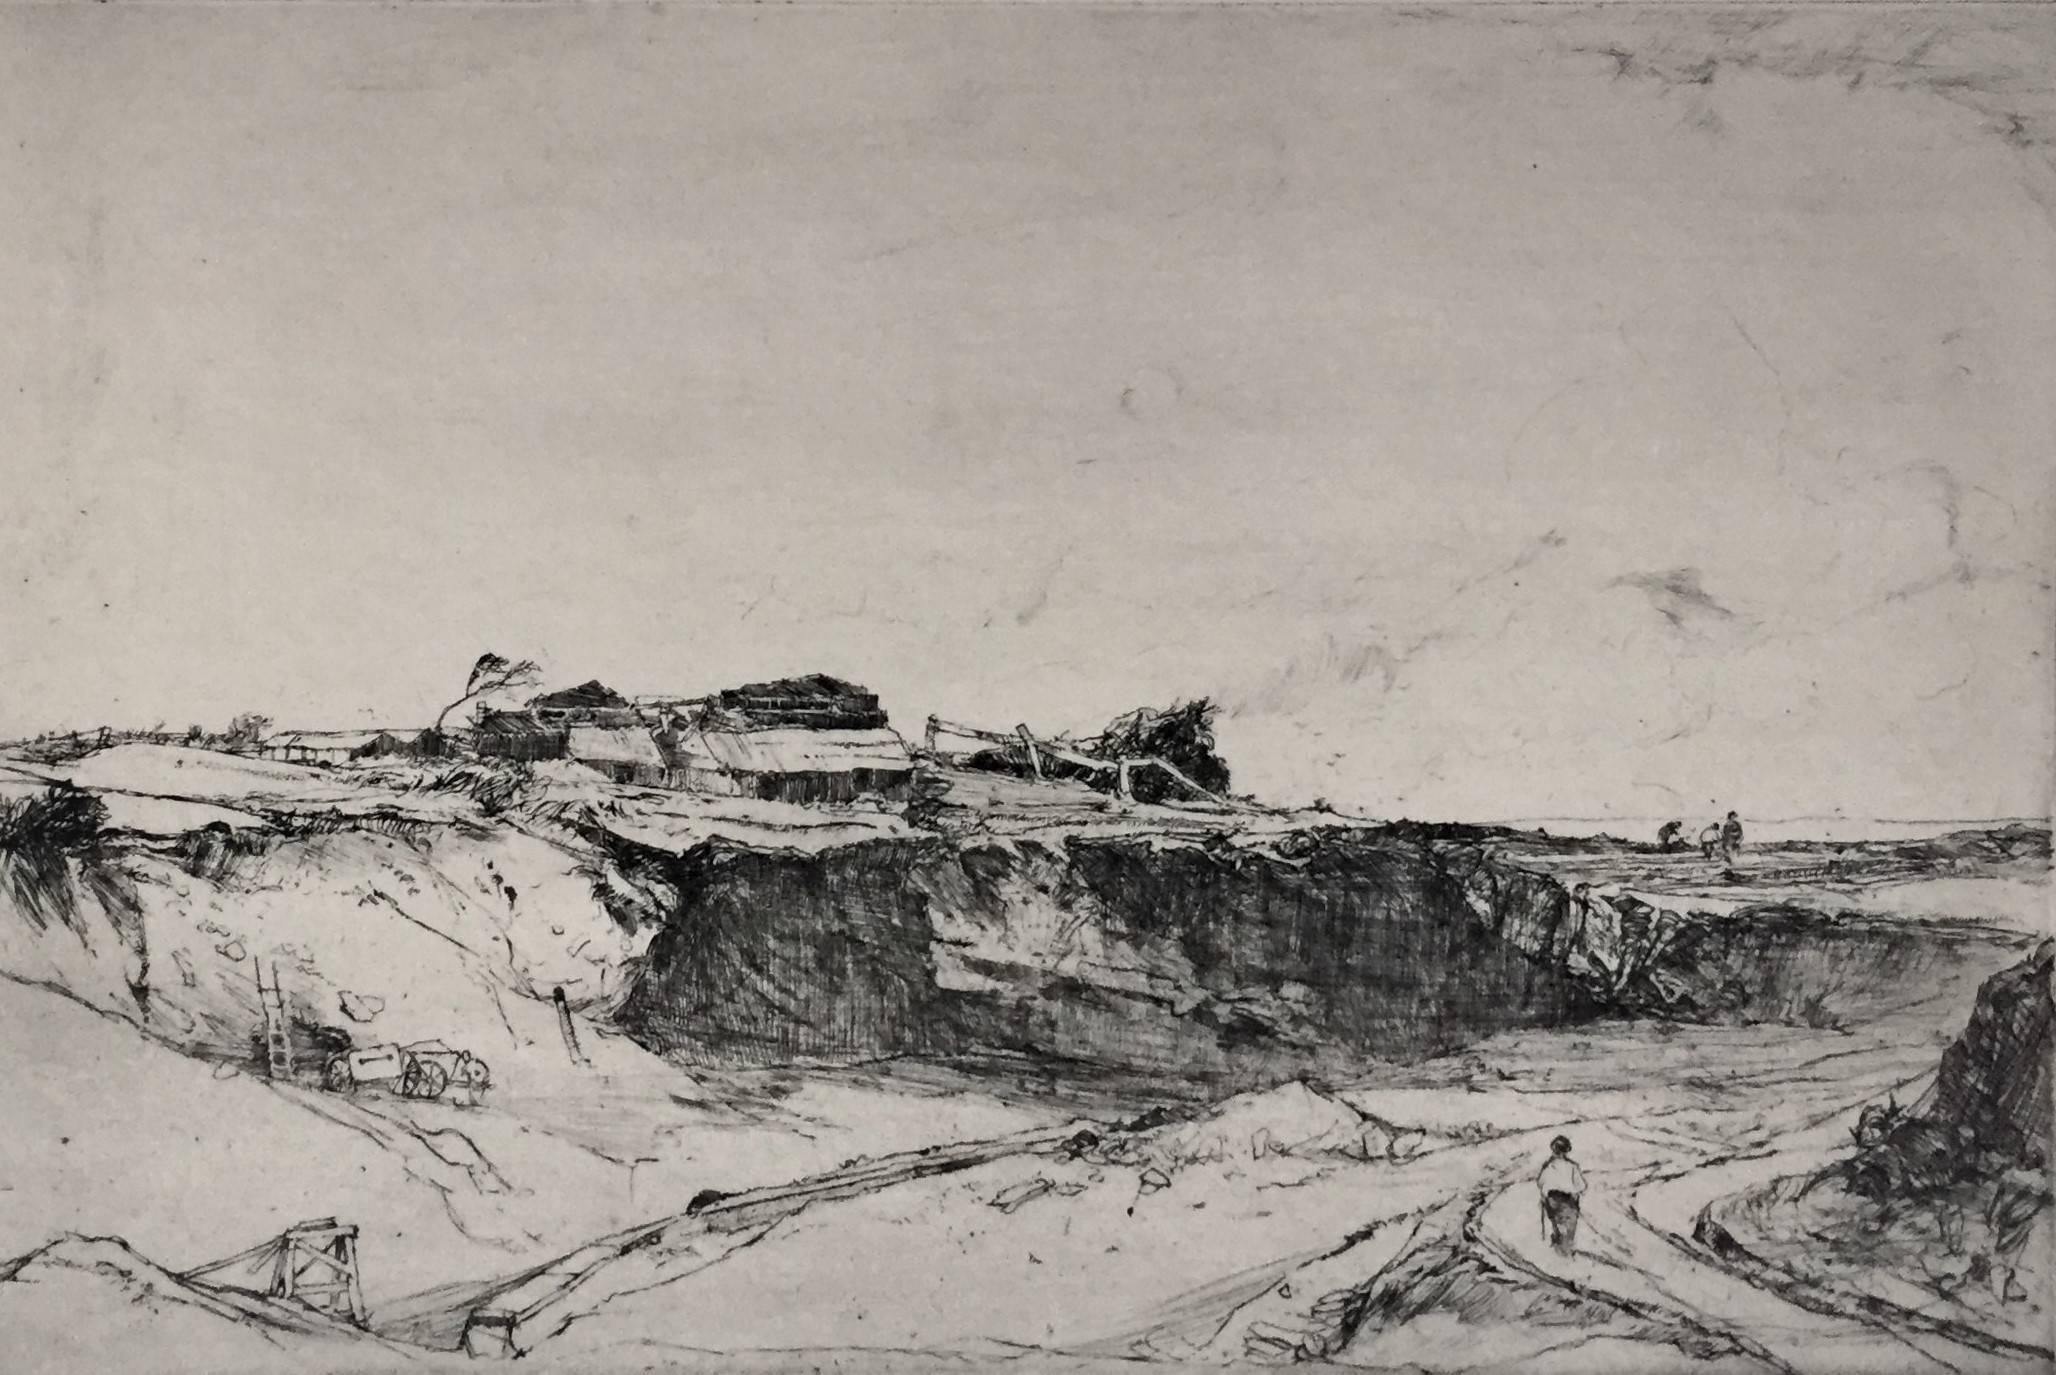 Oliver Hall, R.A., R.E., R.S.W. Figurative Print - Broughton Moor Pits, Durham